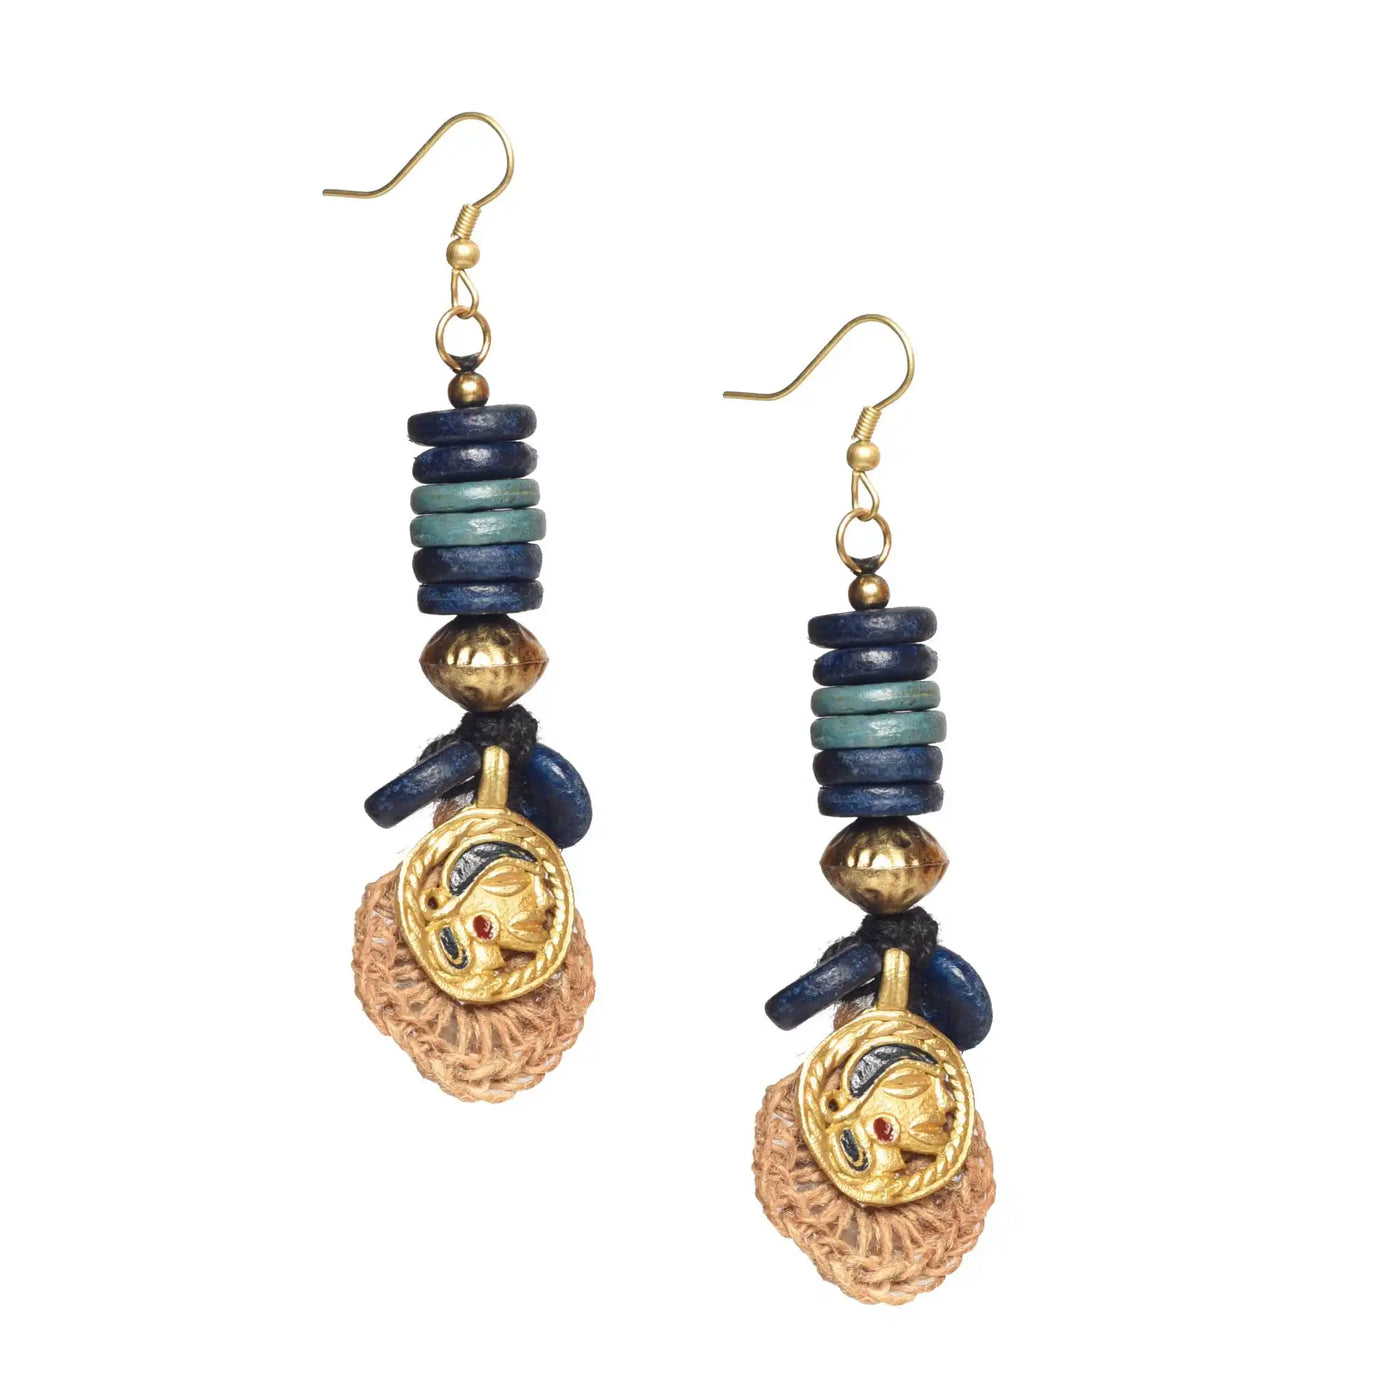 The Queens Loop Handcrafted Earrings - Fashion & Lifestyle - 3